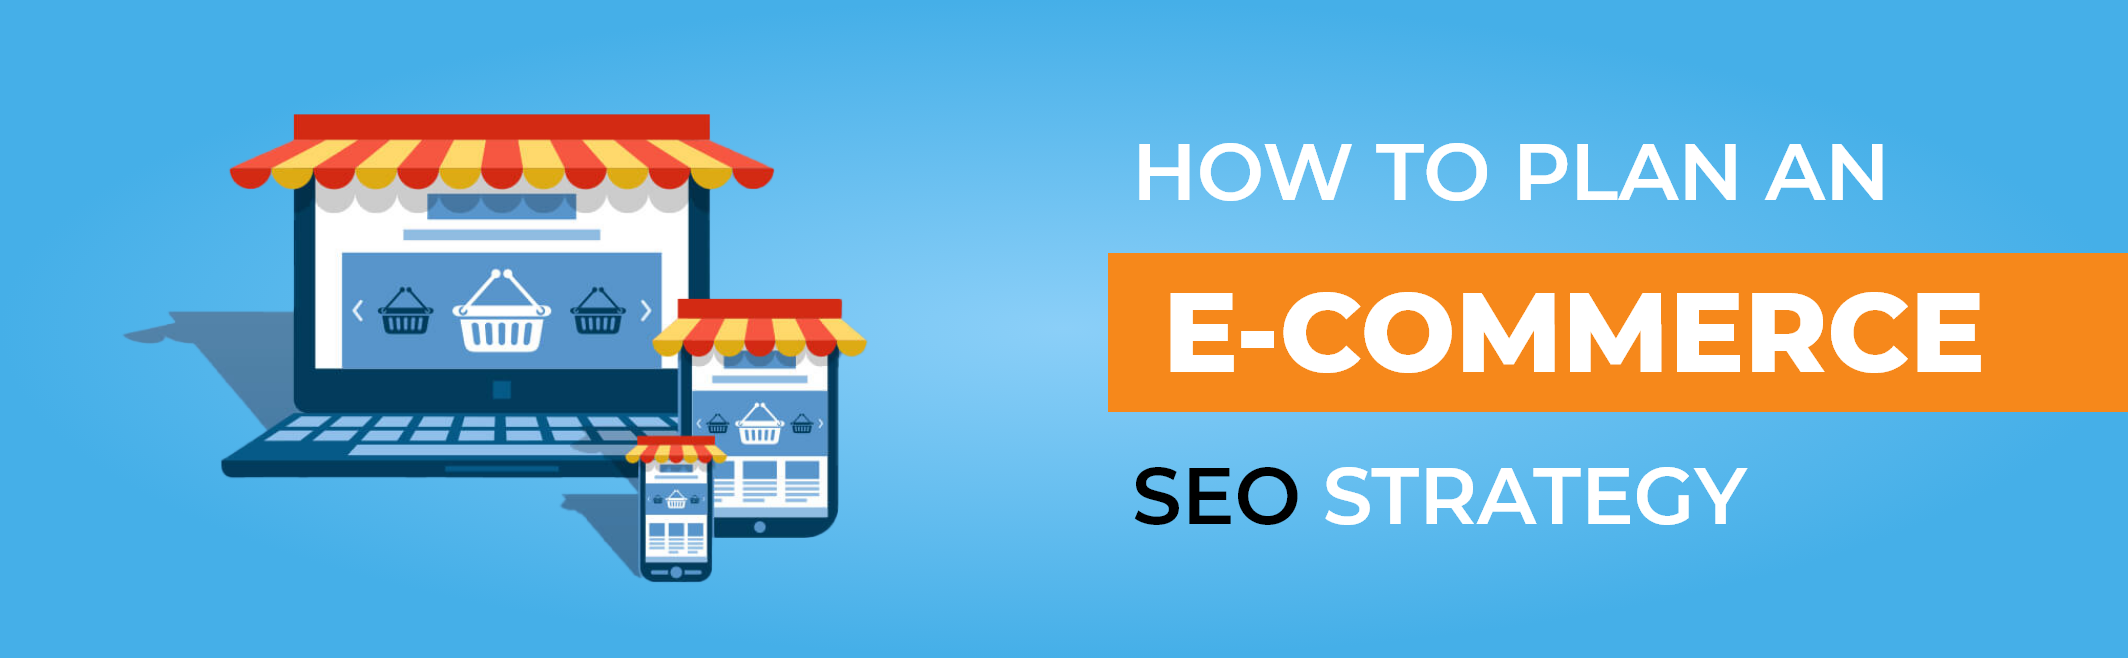 How To Plan An E-Commerce SEO Strategy